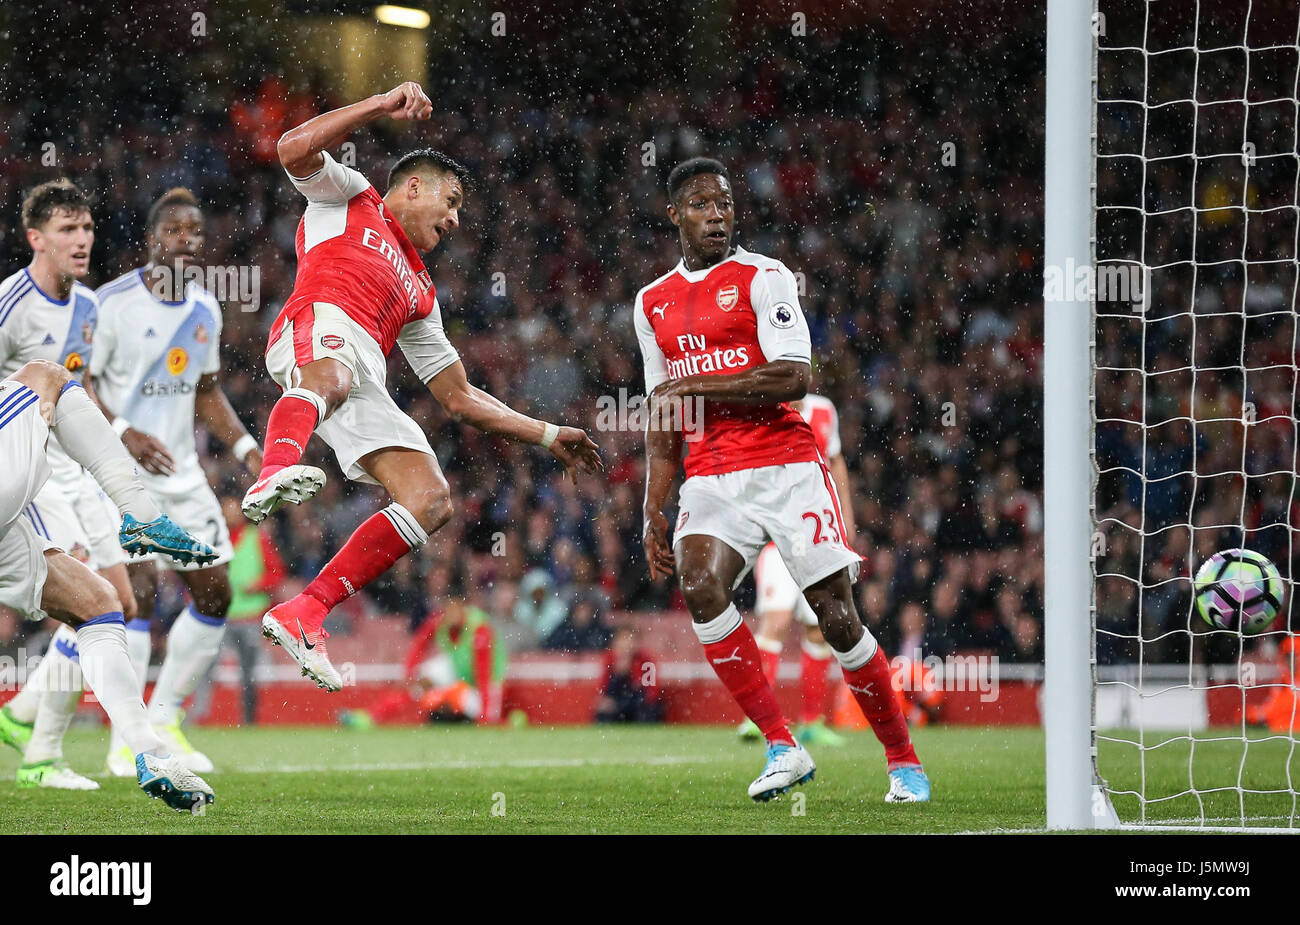 Alexis Sanchez of Arsenal scores to make it 2-0 during the Premier League match between Arsenal and Sunderland AFC at the Emirates Stadium in London. 16 May 2017 EDITORIAL USE ONLY No merchandising. For Football images FA and Premier League restrictions apply inc. no internet/mobile usage without FAPL license - for details contact Football Dataco Arron Gent /TELEPHOTO IMAGES Stock Photo